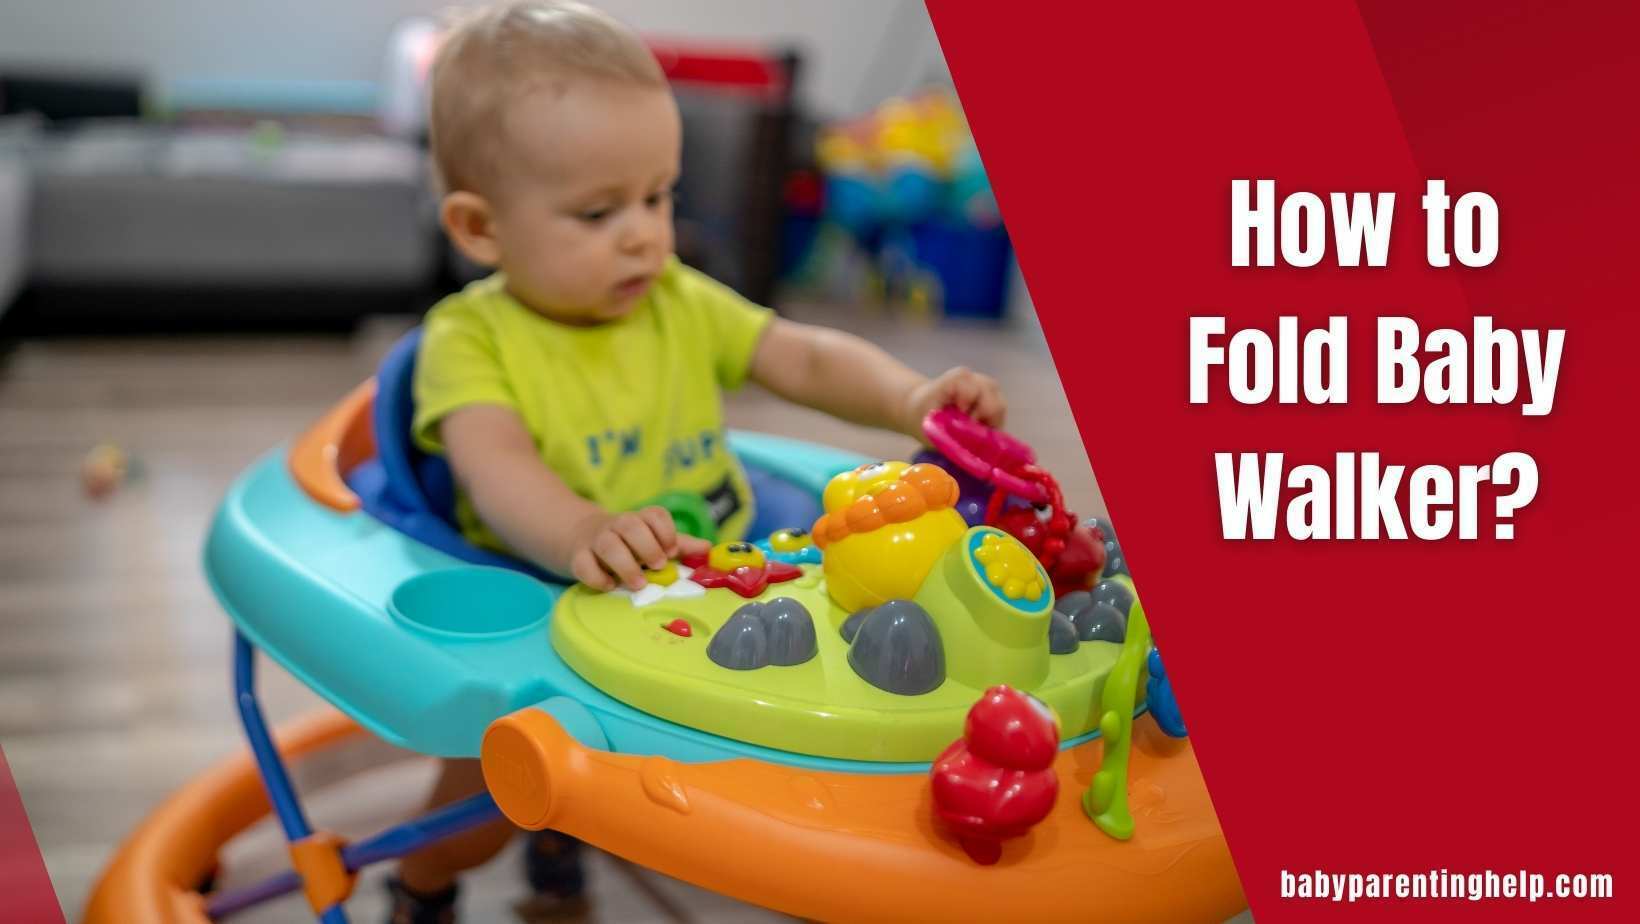 How to Fold Baby Walker